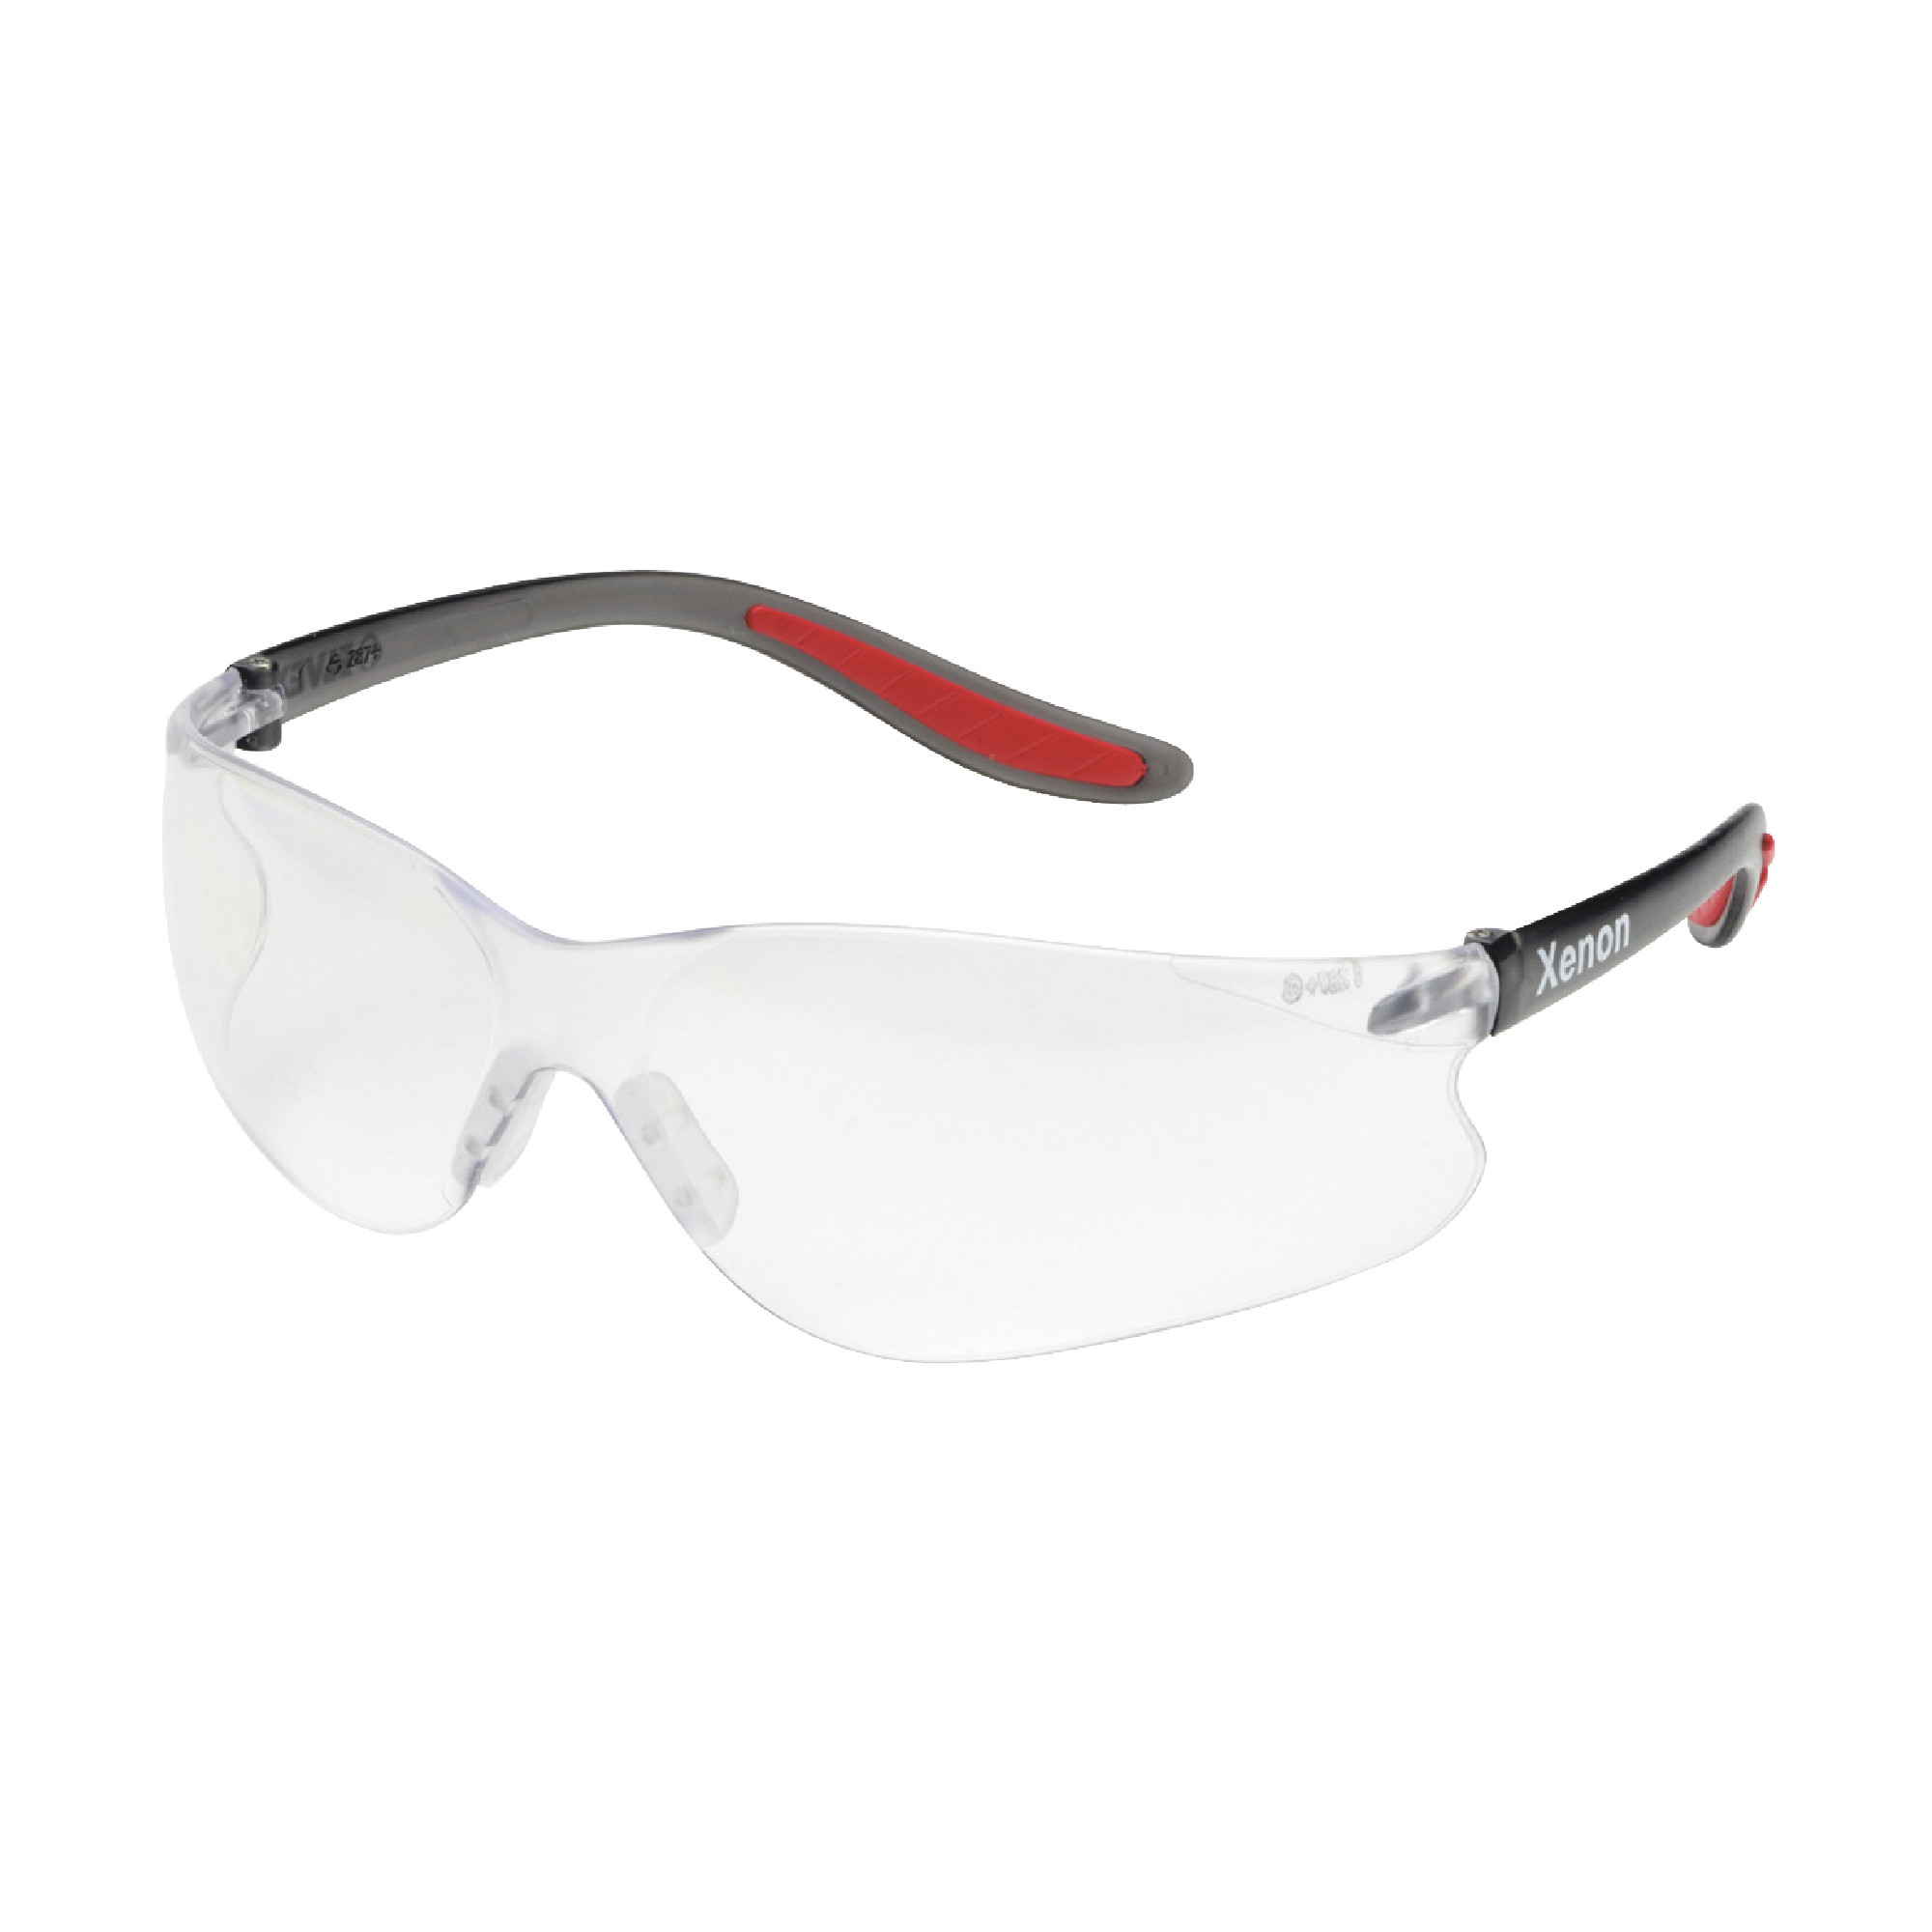 ELVEX Xenon Clear Lens Safety Glasses With Anti-Fog Coating